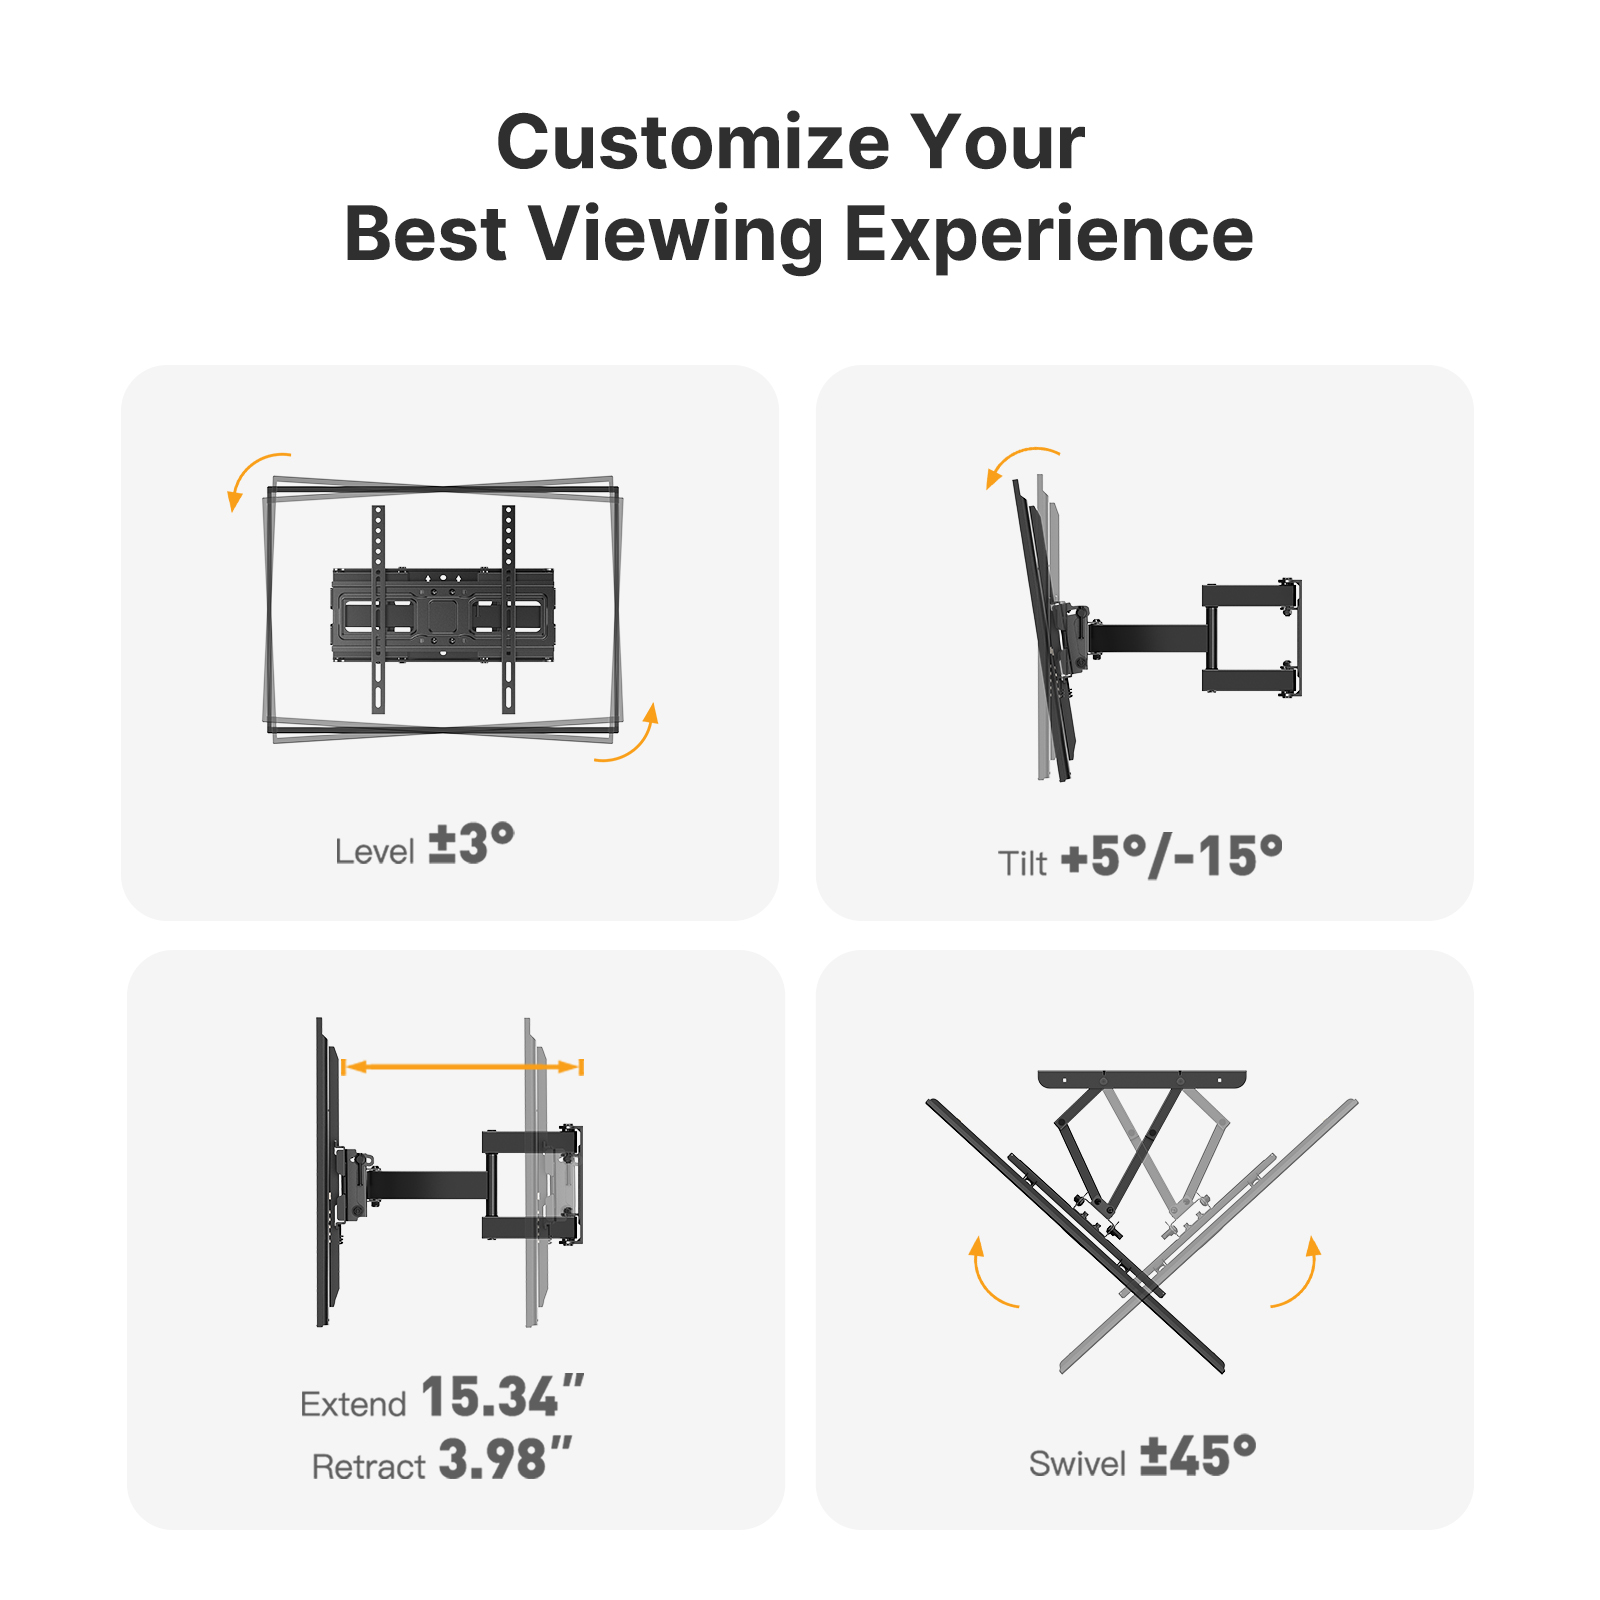 Full Motion Articulating TV Wall Mount  Swivel Tilting Bracket Fit for 26-65 In Flat & Curved TVs - image 5 of 8